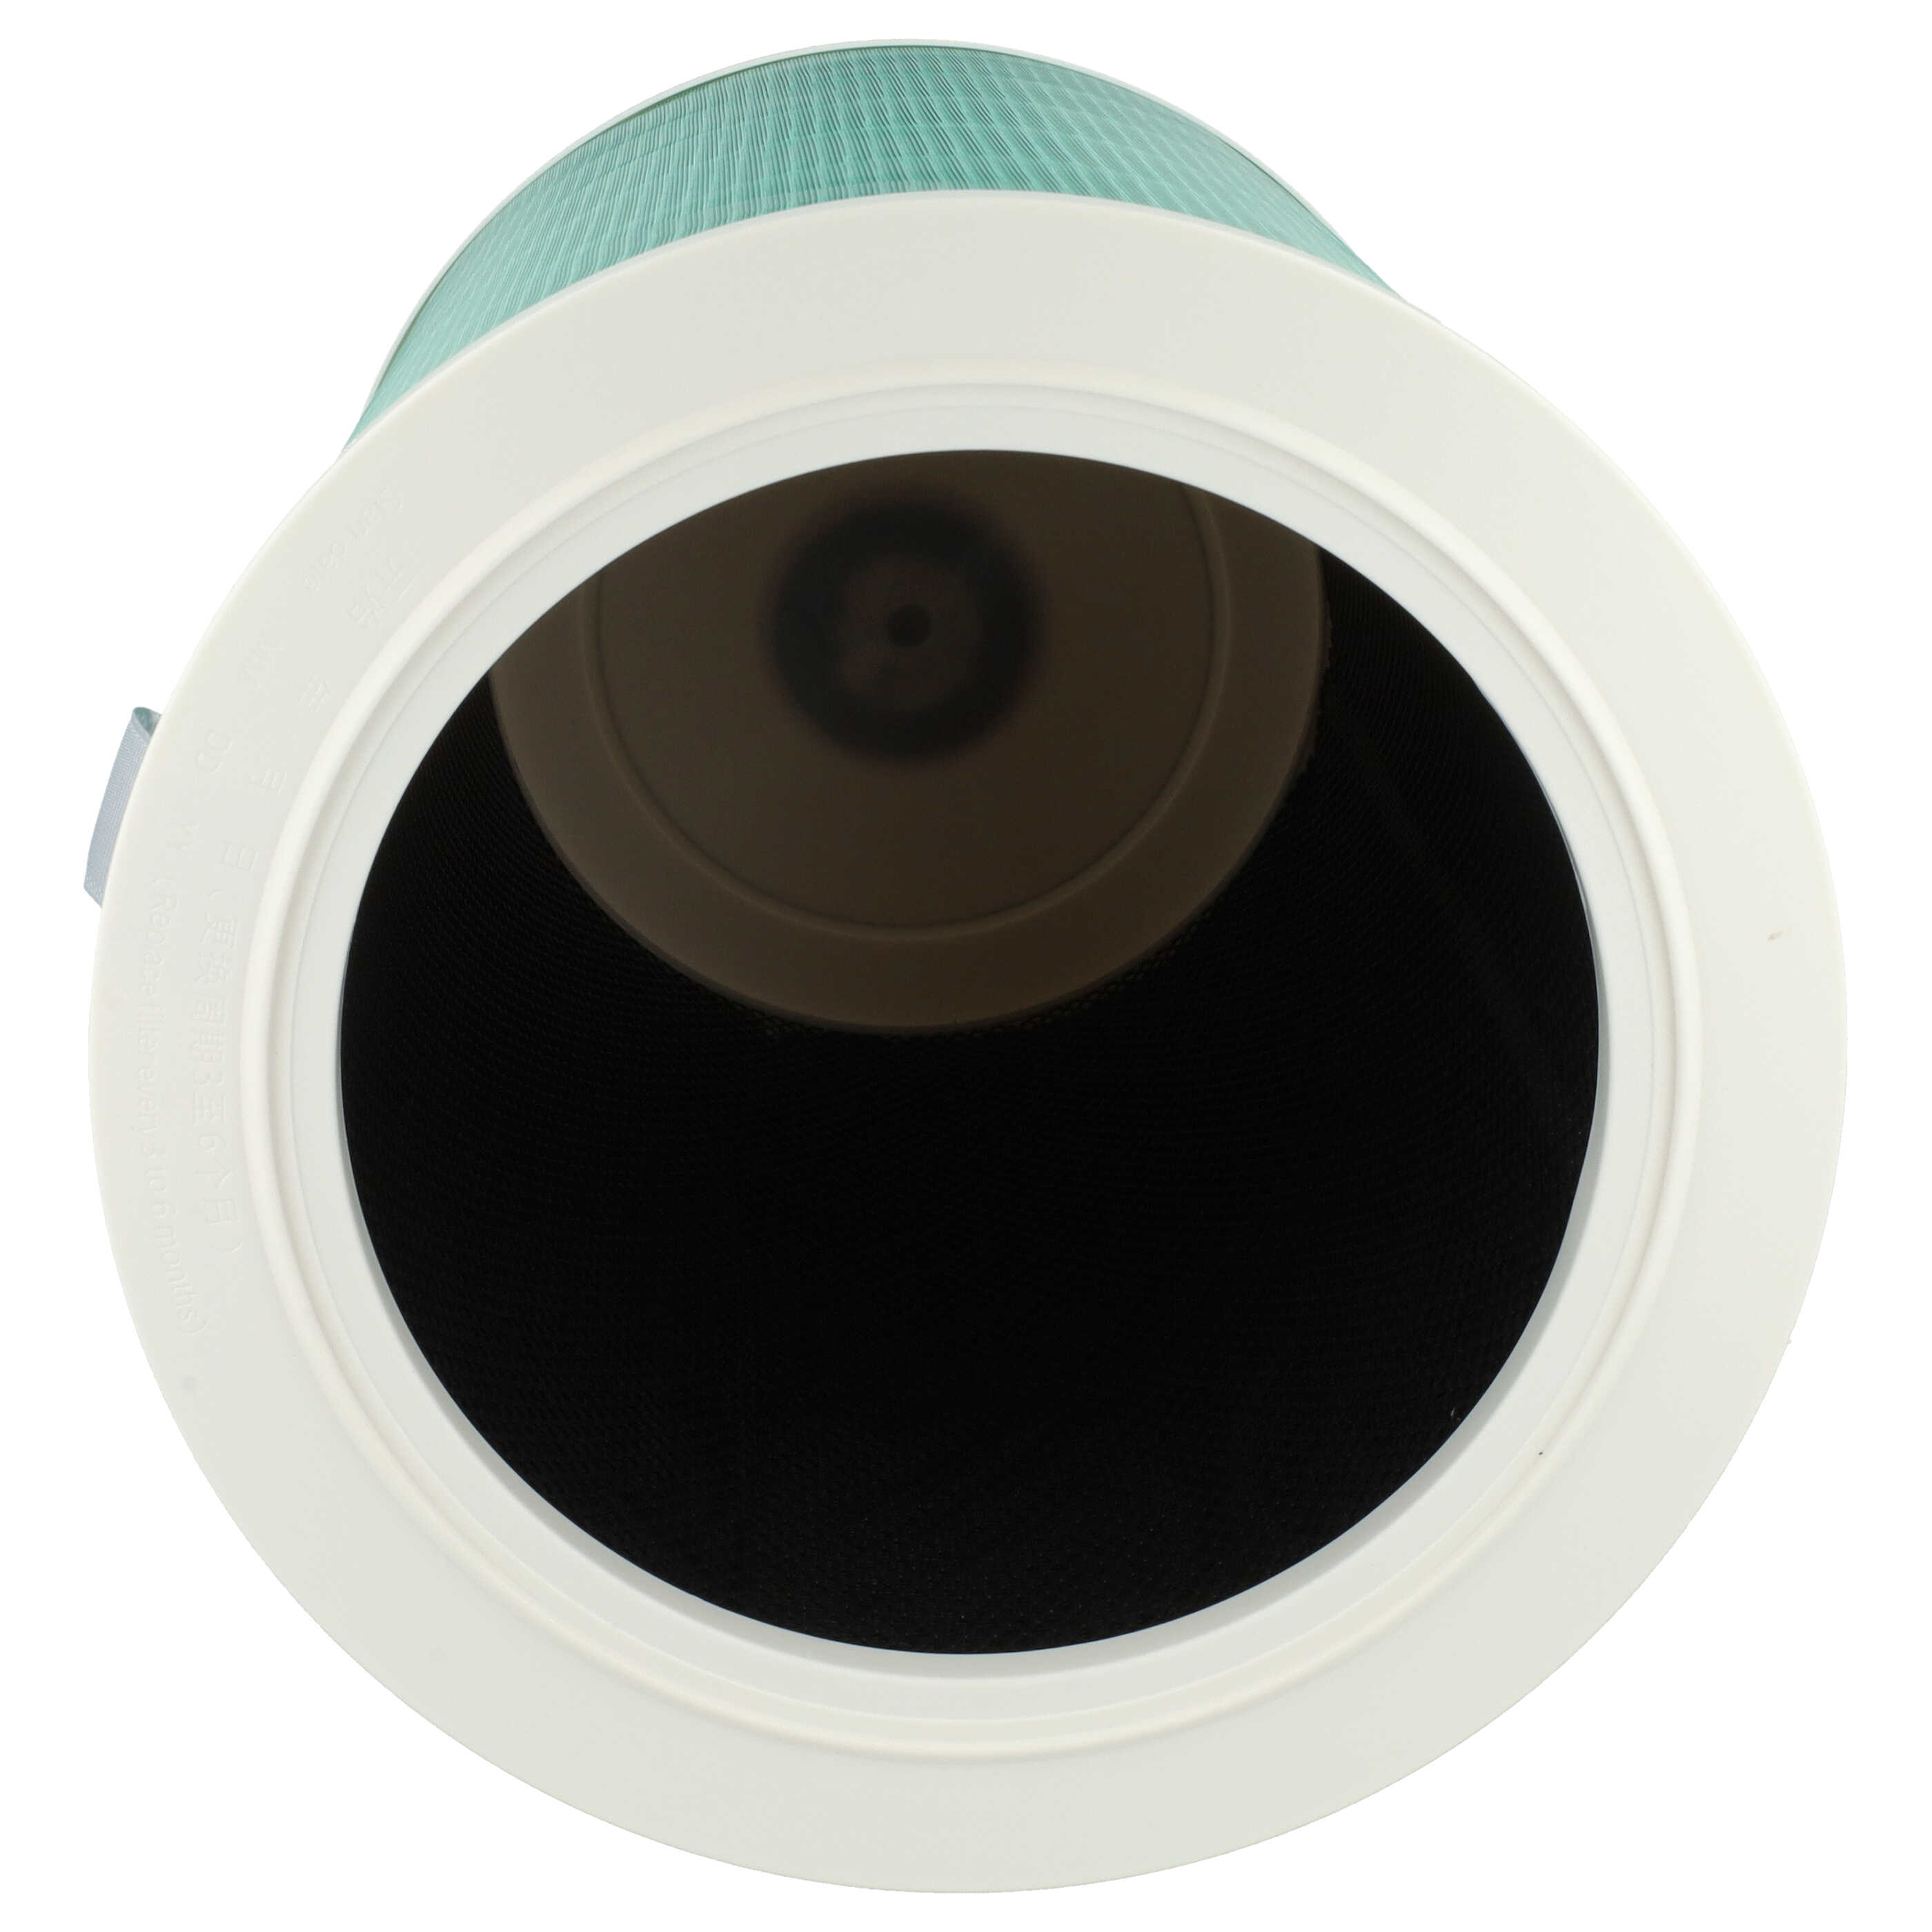 Filter as Replacement for Xiaomi M6R-FLP etc. - HEPA (HEPA) + Activated Carbon